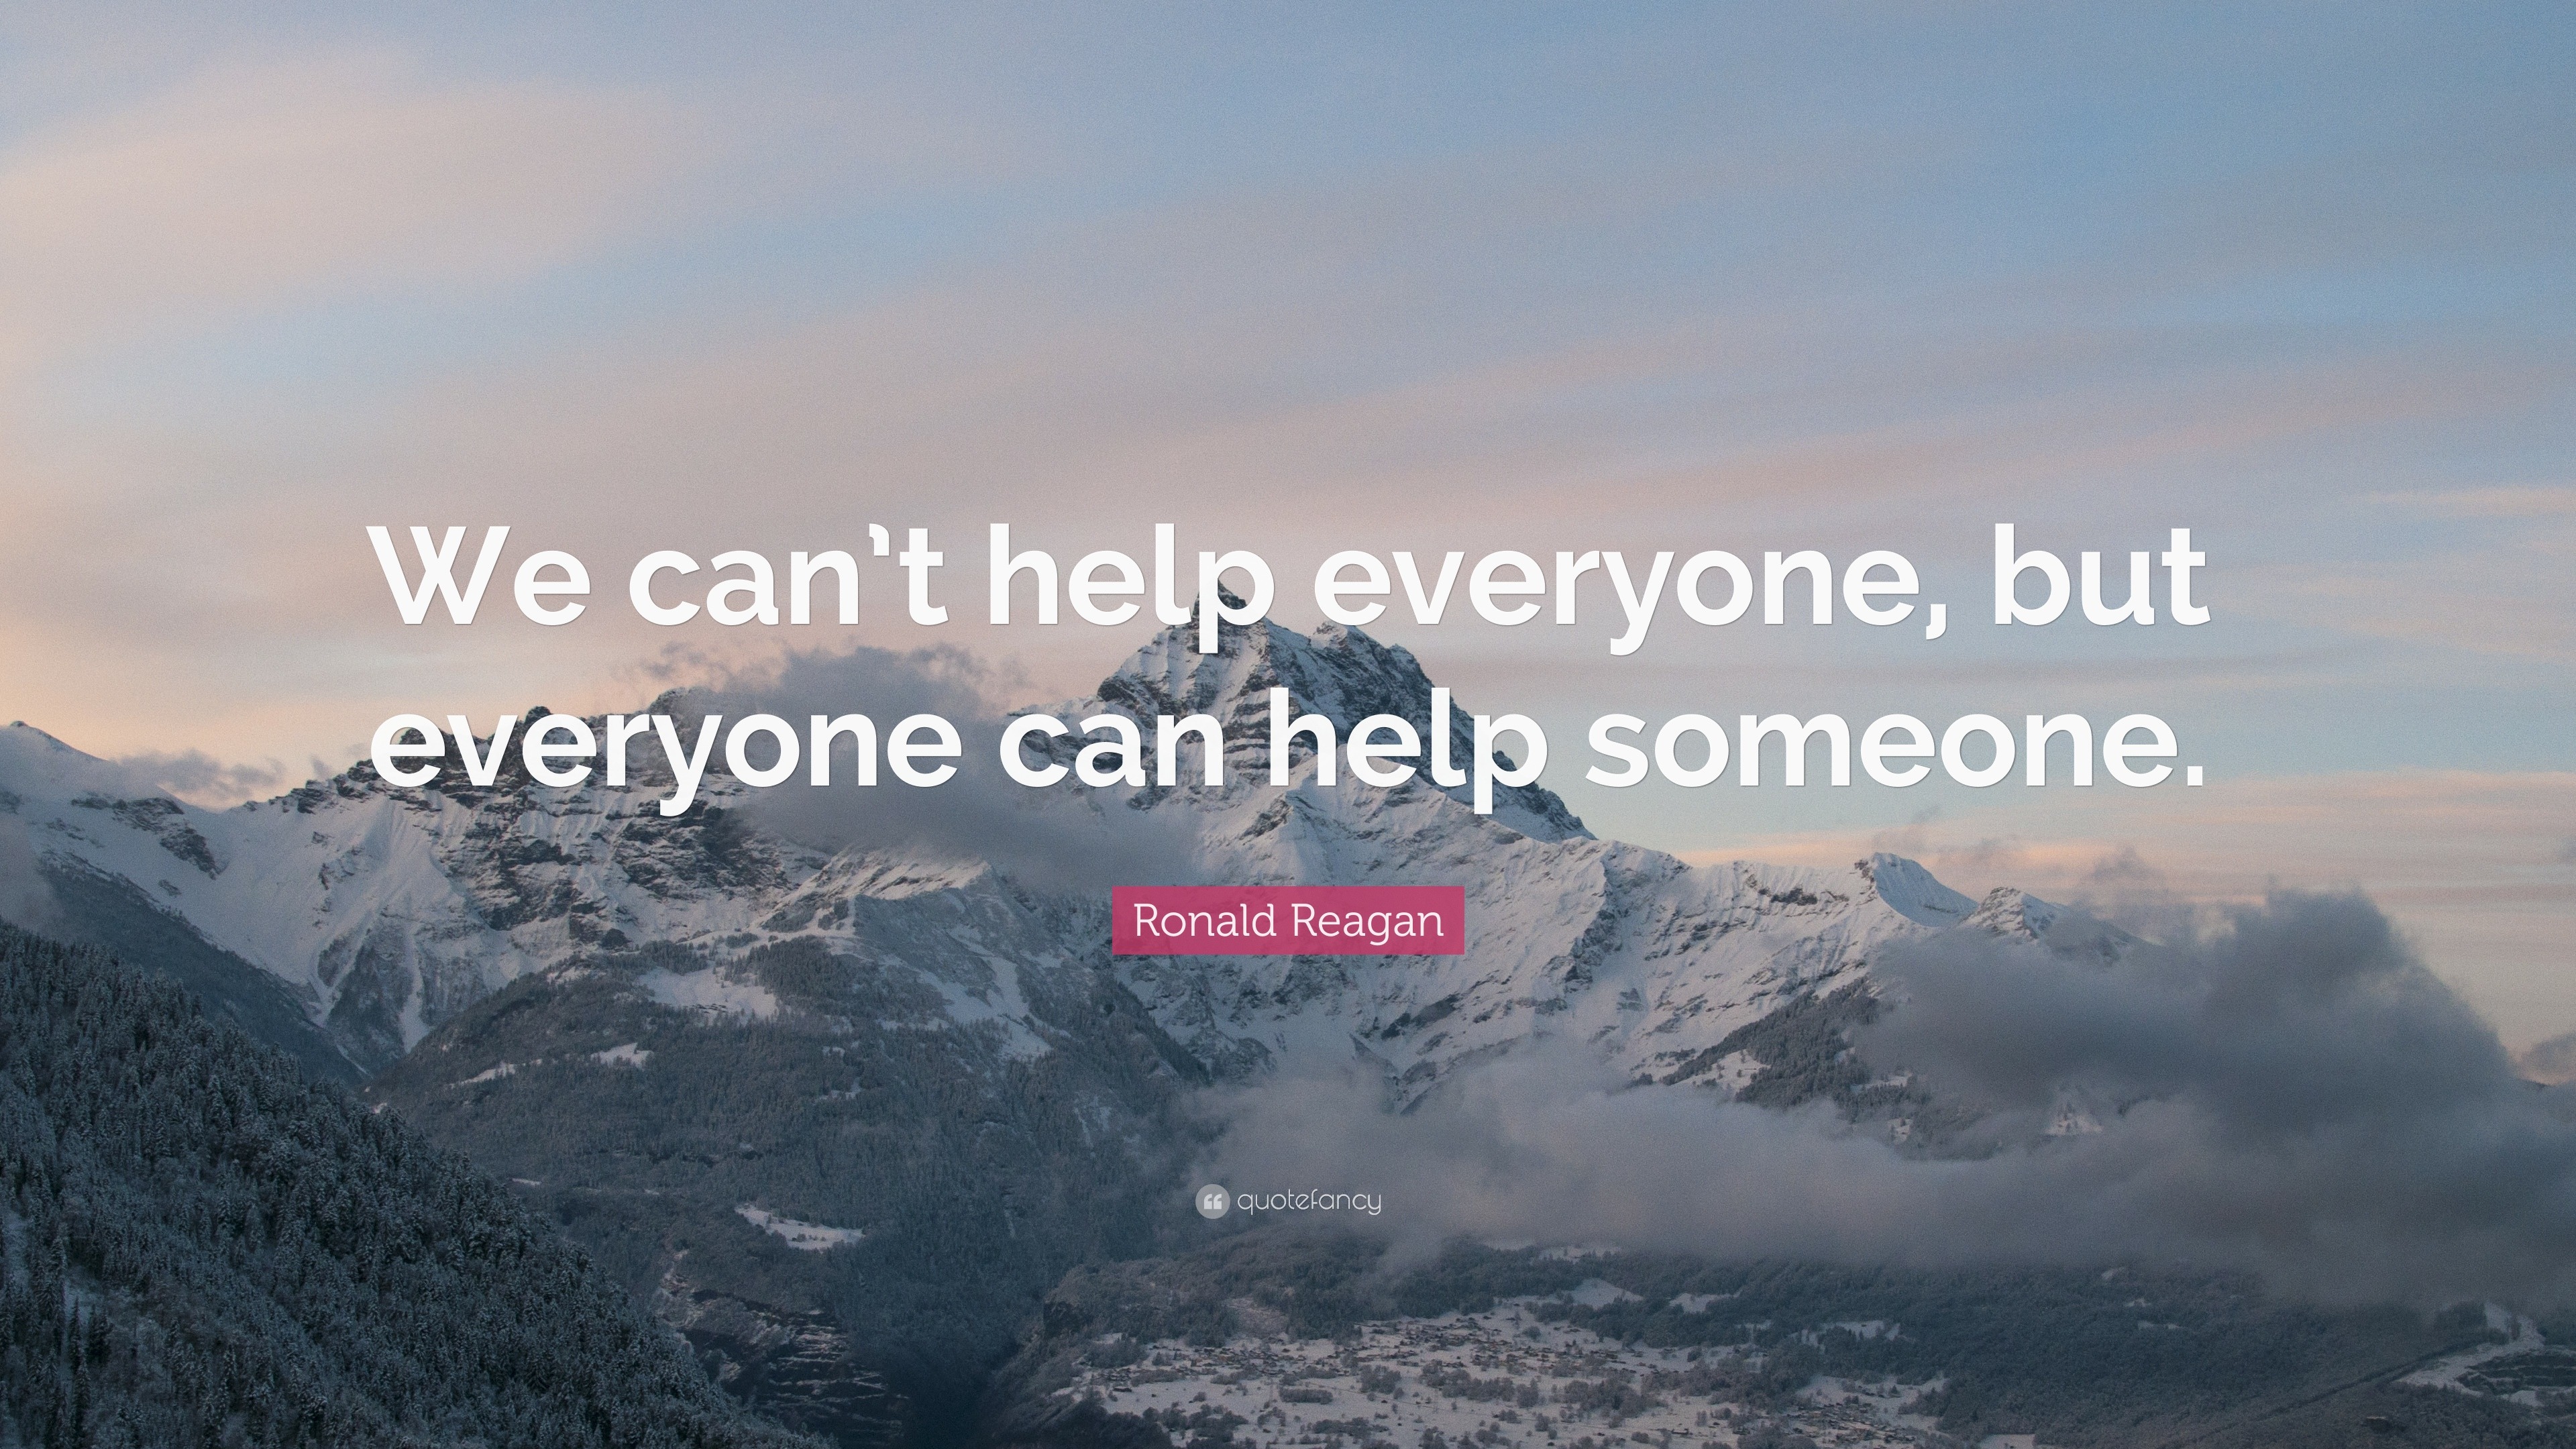 Ronald Reagan Quote: “We can’t help everyone, but everyone can help